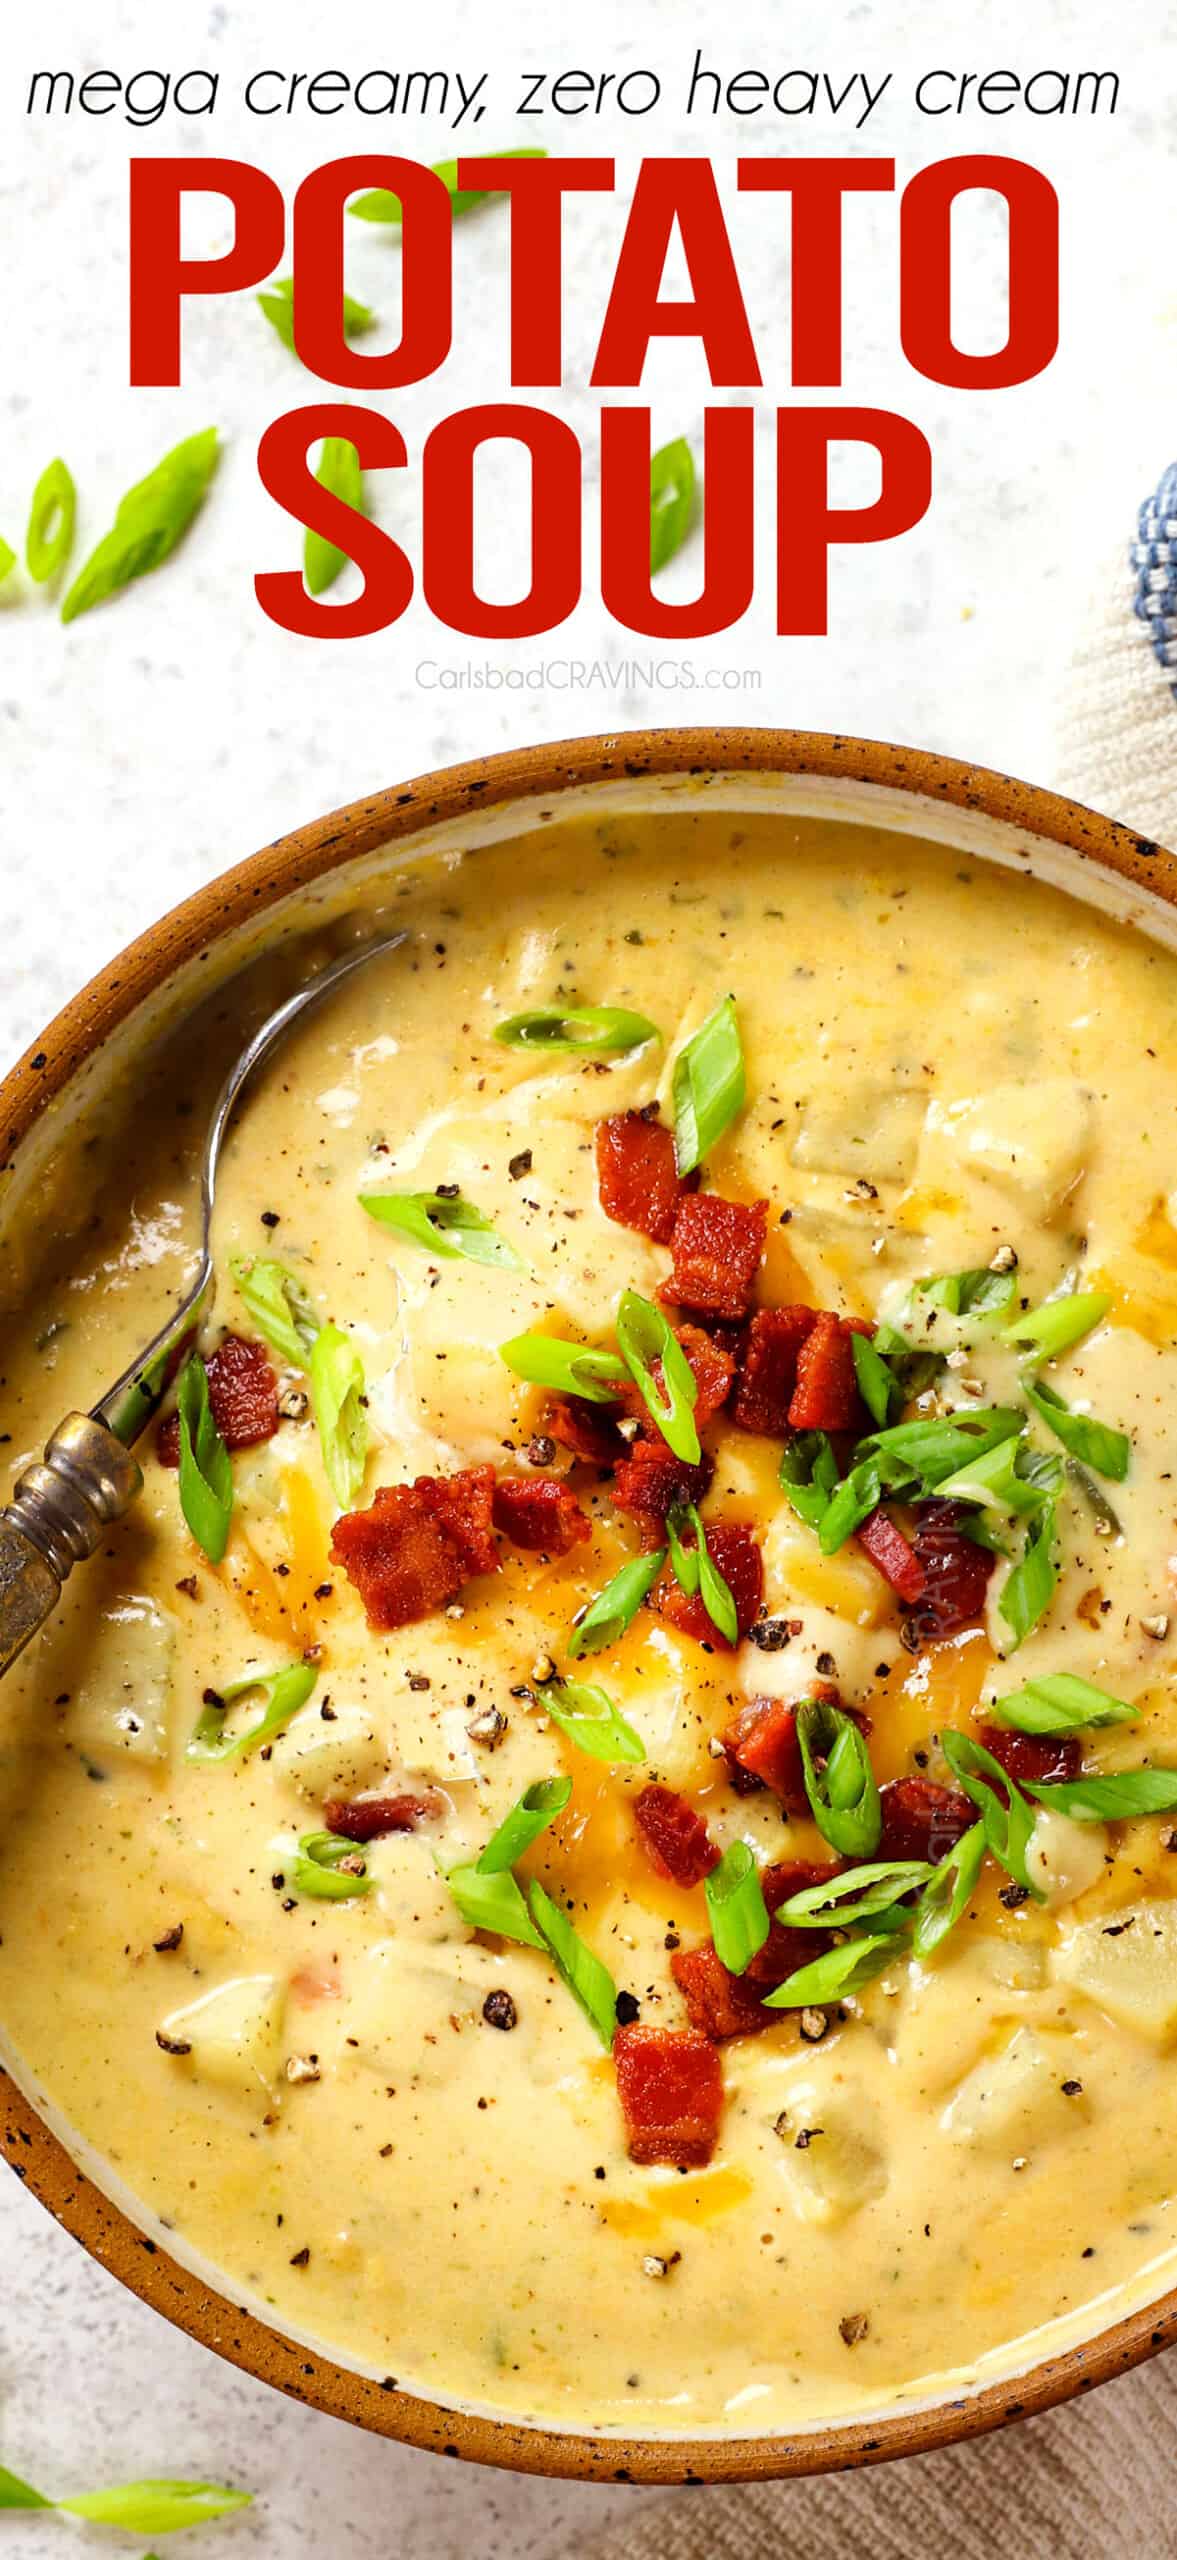 top view of serving potato soup recipe in a bowl garnished by cheese, green onions and bacon